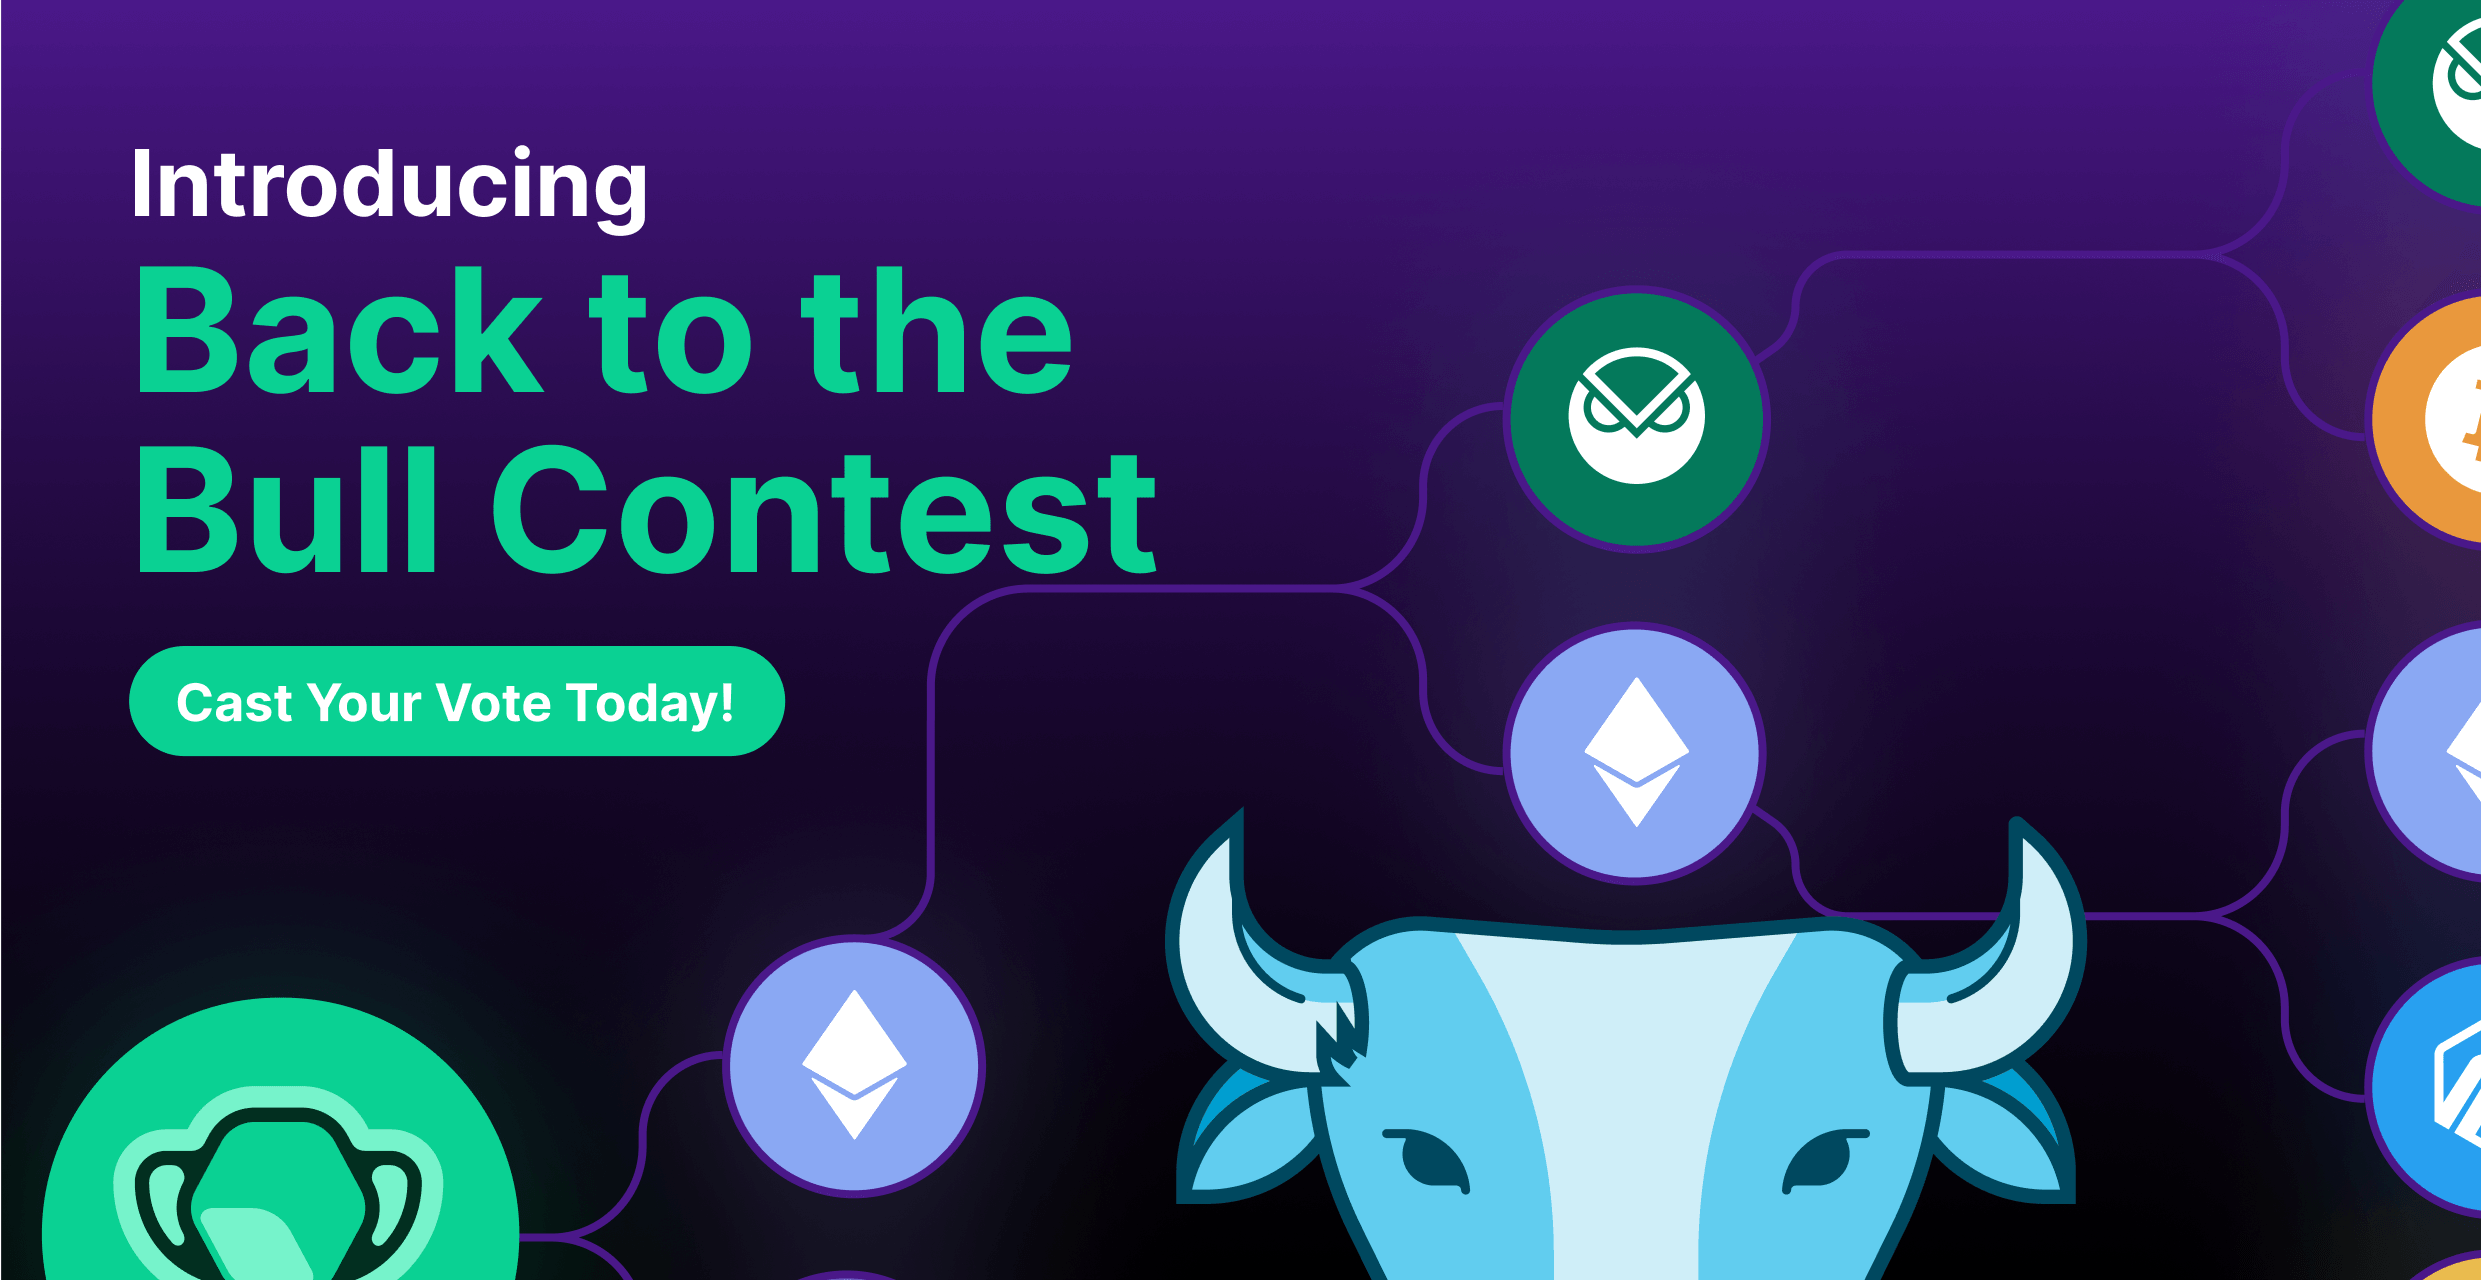 Back to the Bull Contest: winners, updates, and more